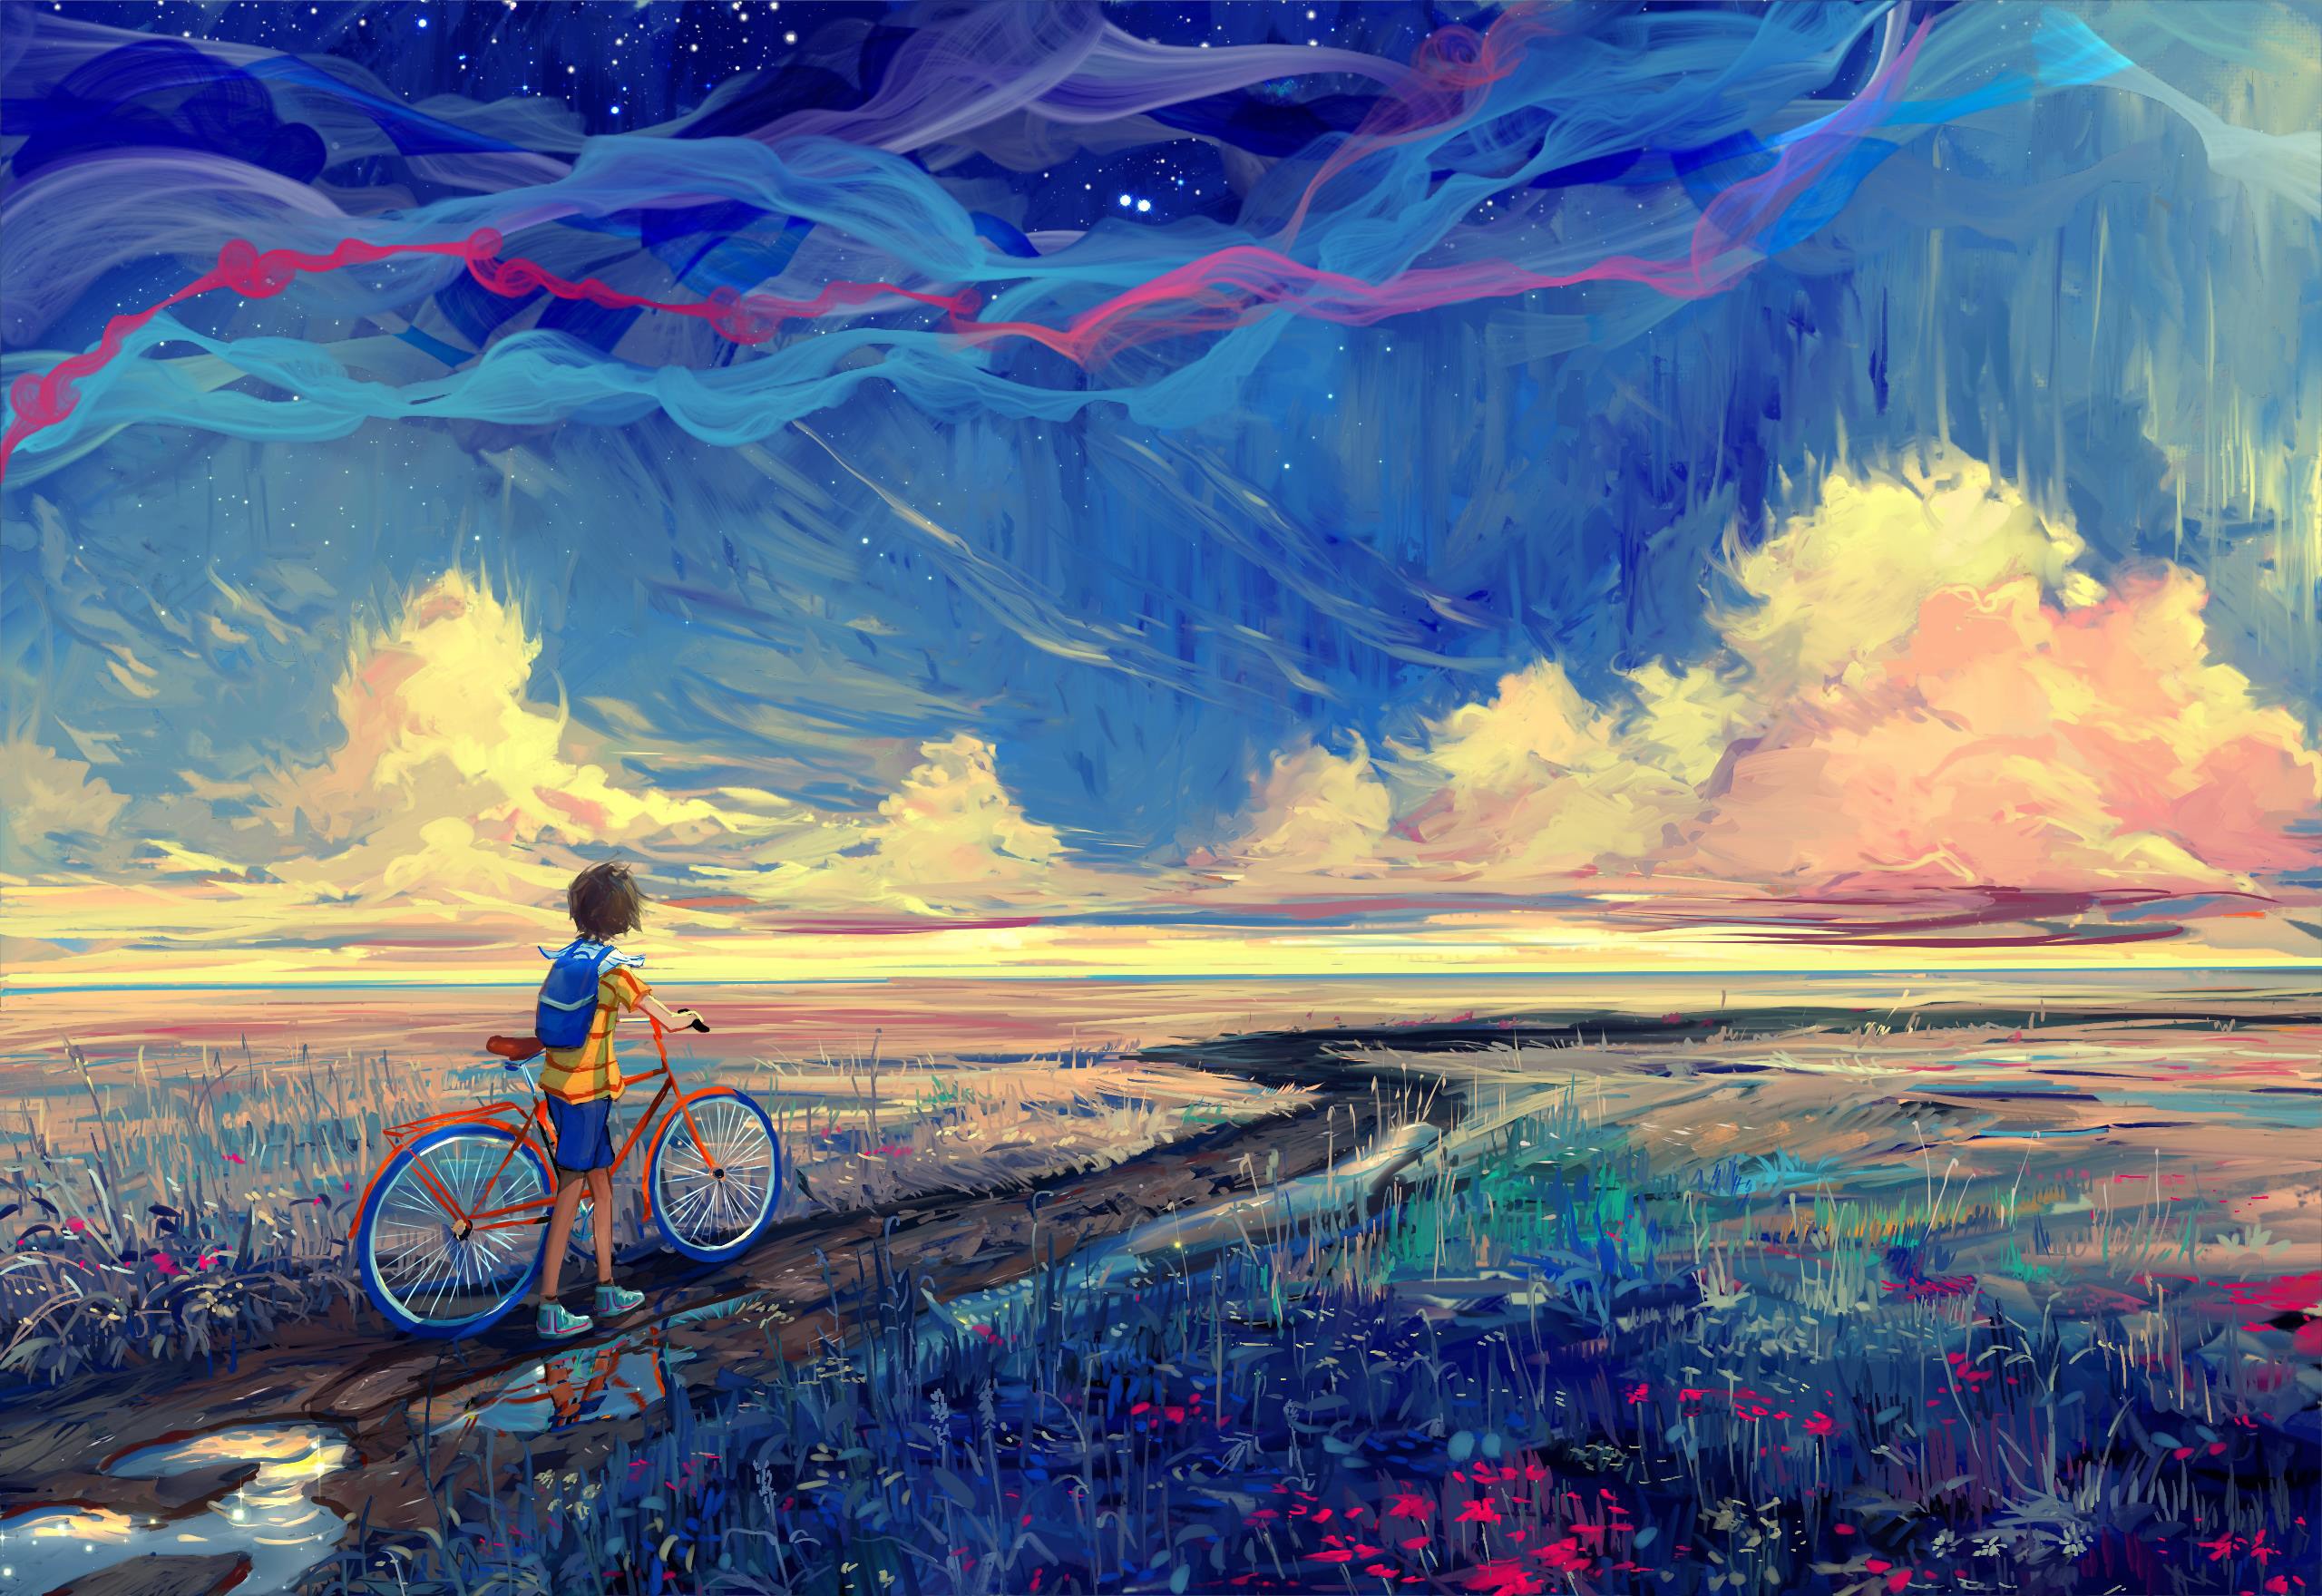 General 2560x1760 bicycle artwork fantasy art painting sky field stars clouds outdoors vehicle path